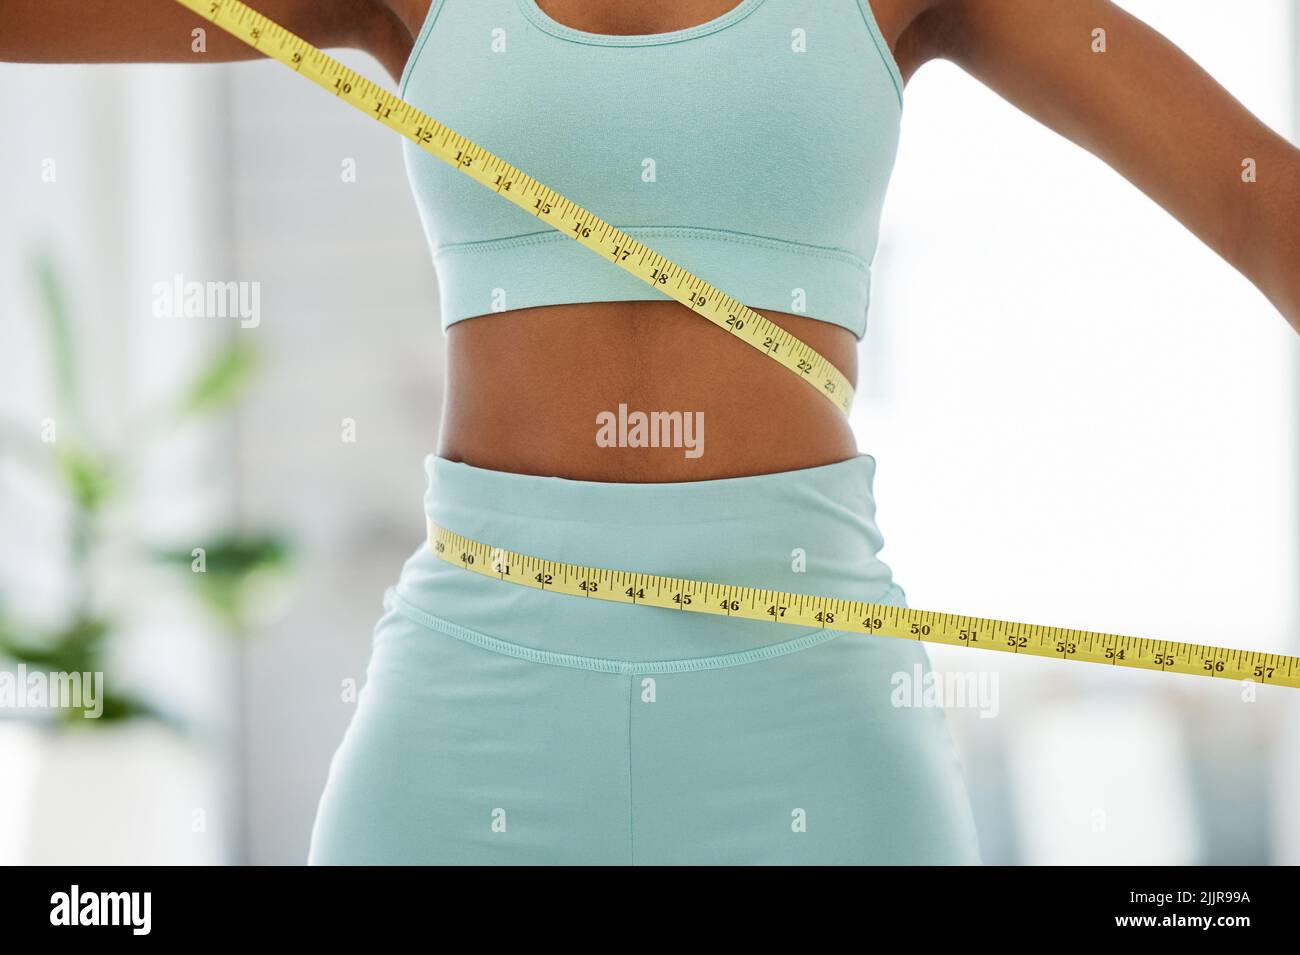 https://c8.alamy.com/comp/2JJR99A/losing-those-pounds-an-unrecognisable-woman-standing-alone-and-using-a-measuring-tape-around-her-waist-in-a-yoga-studio-2JJR99A.jpg